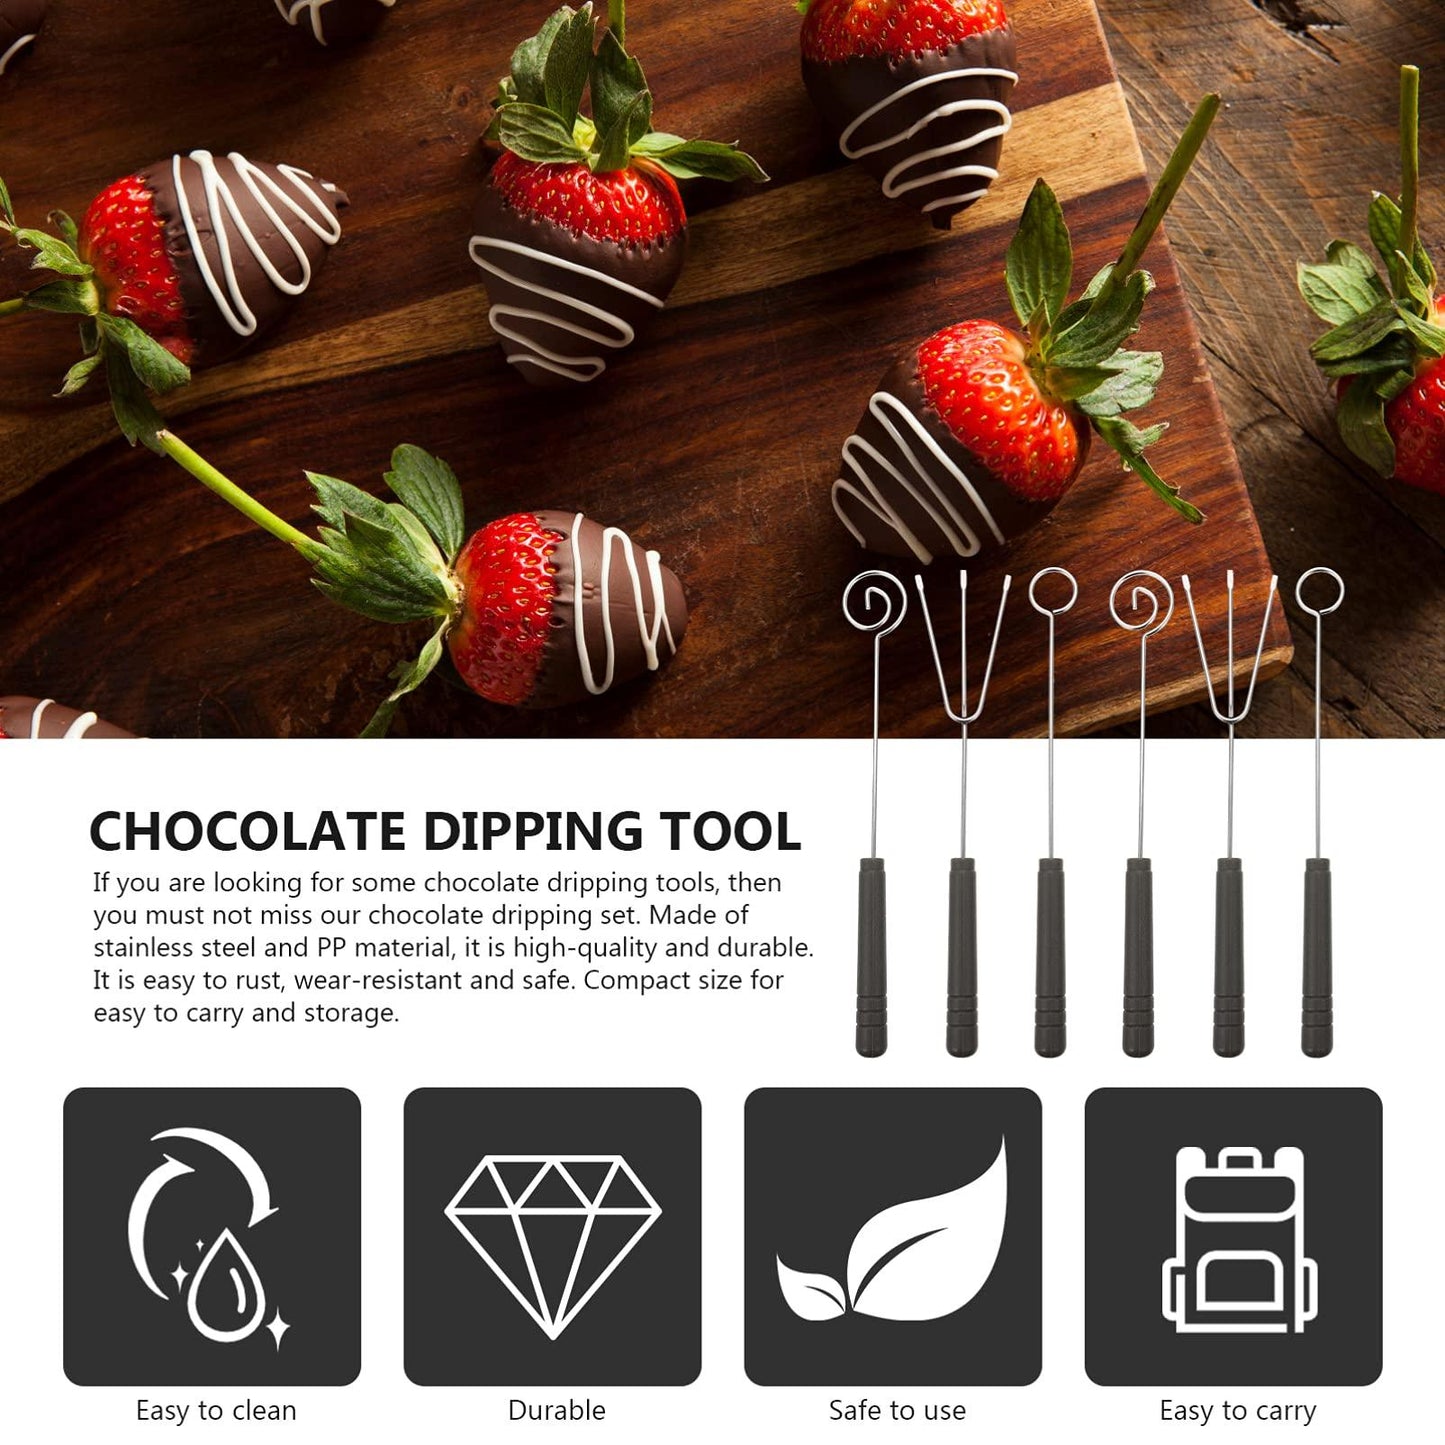 DOITOOL Cheese Fondue 6pcs Chocolate Dipping Set Candy Dipping Tools Stainless Steel Cake Dipping Fork Spoons DIY Baking Supplies for Decorative Cake Chocolate Plates Chocolate Fondue - CookCave